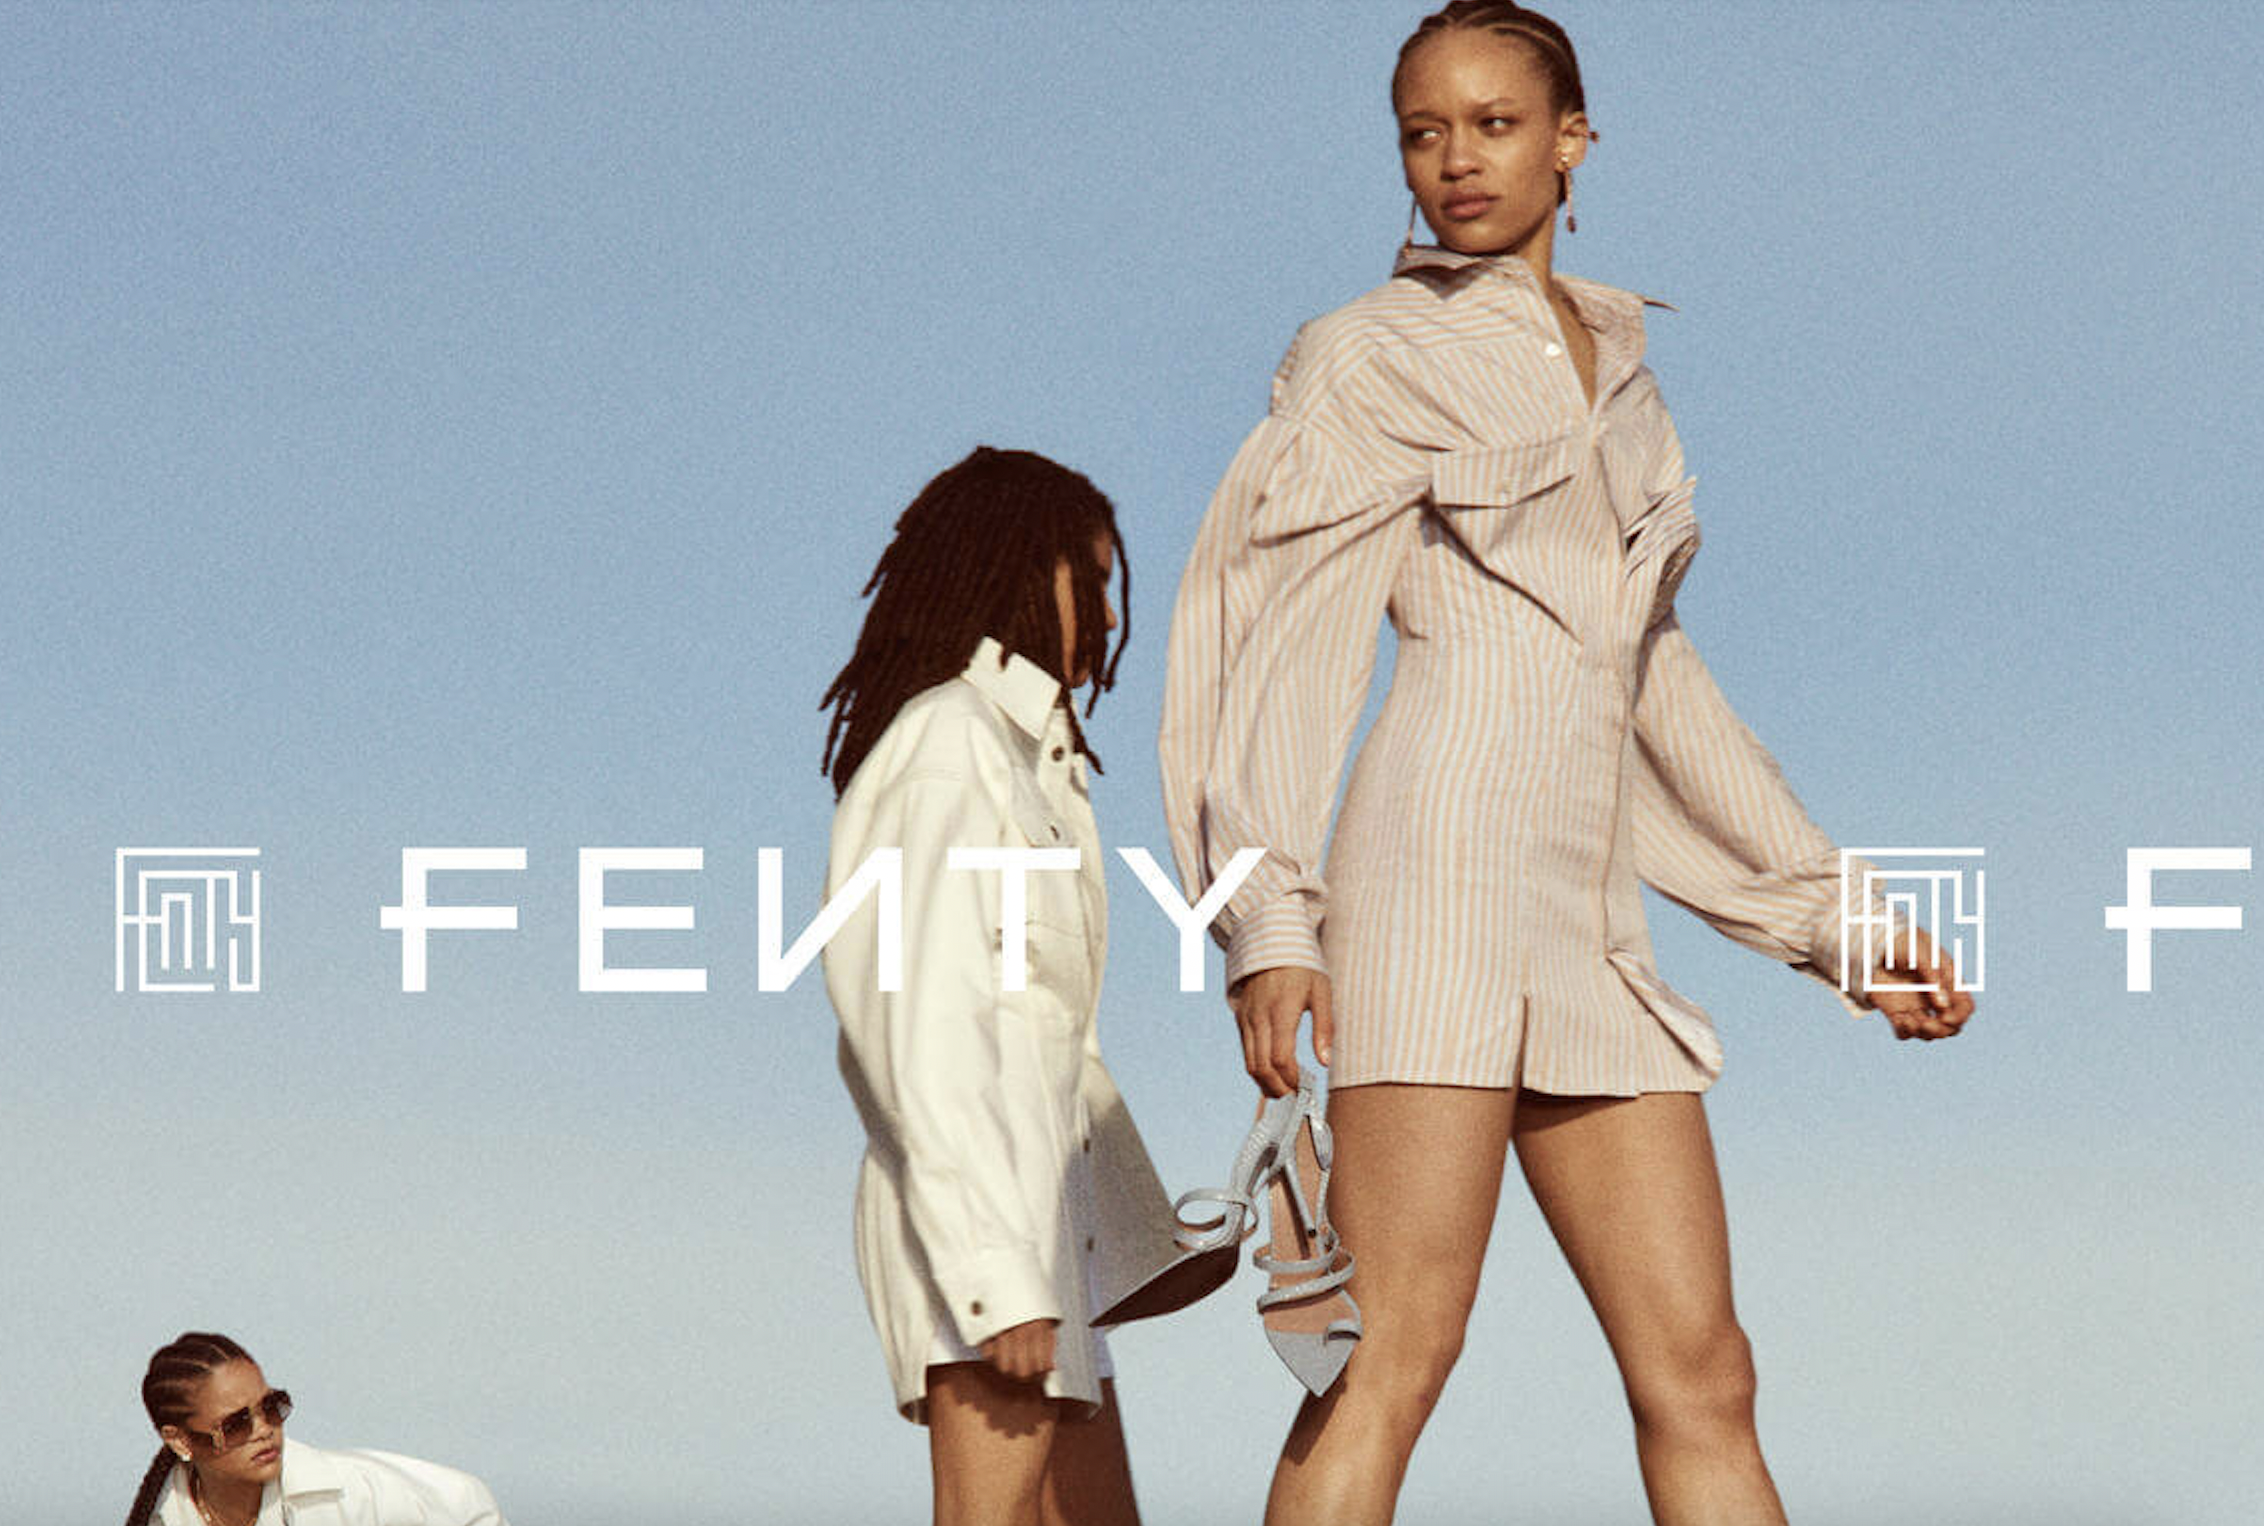 Rihanna's New 'Fenty' Fashion Line With 'LVMH' Is Coming